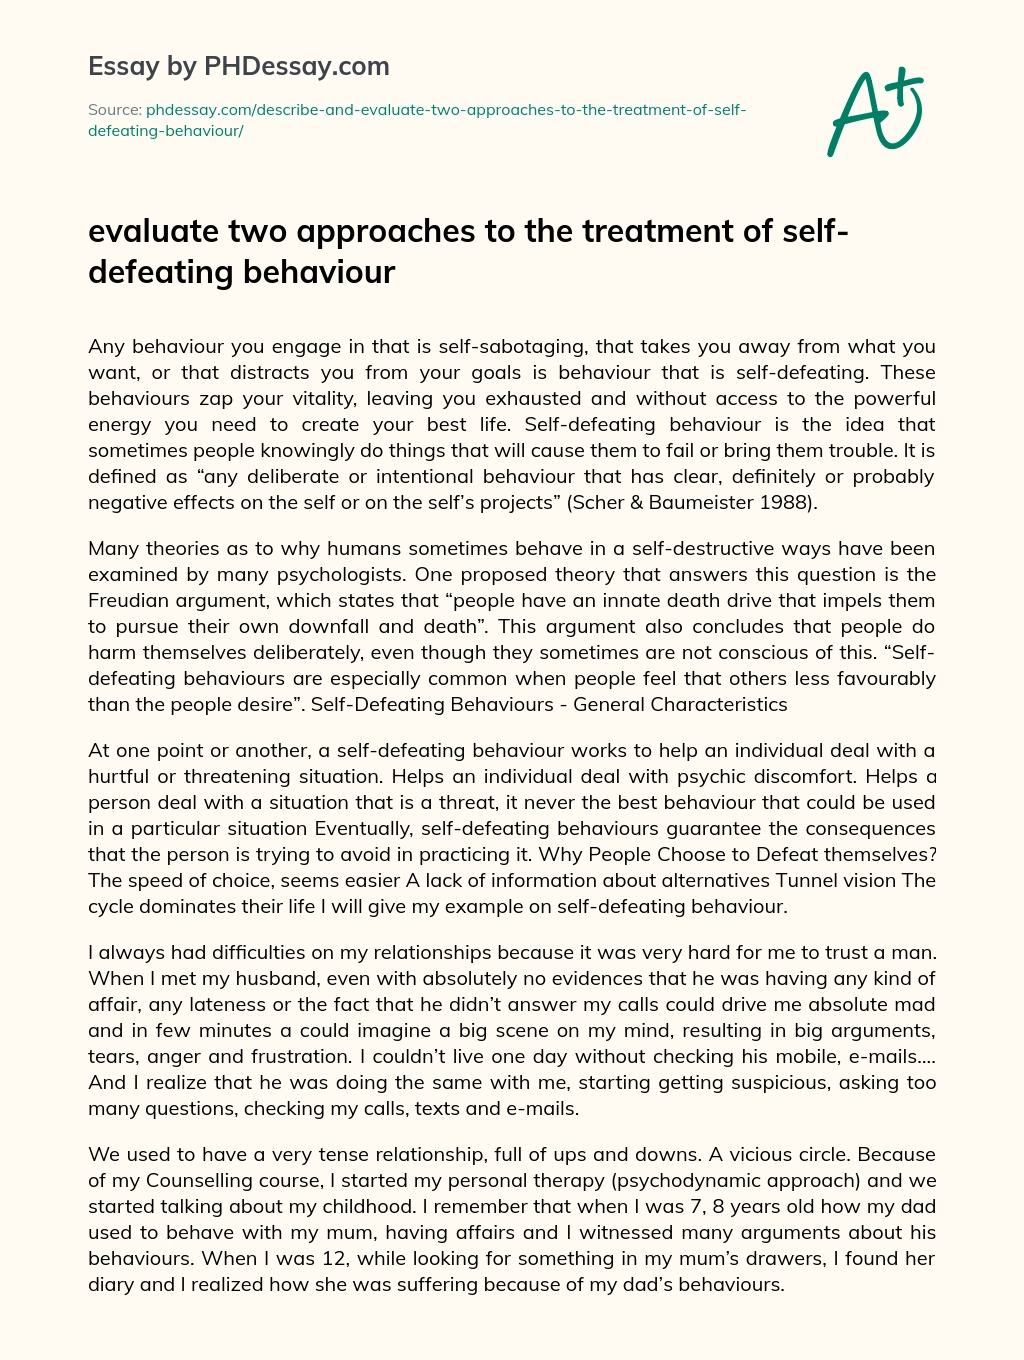 evaluate two approaches to the treatment of self-defeating behaviour essay